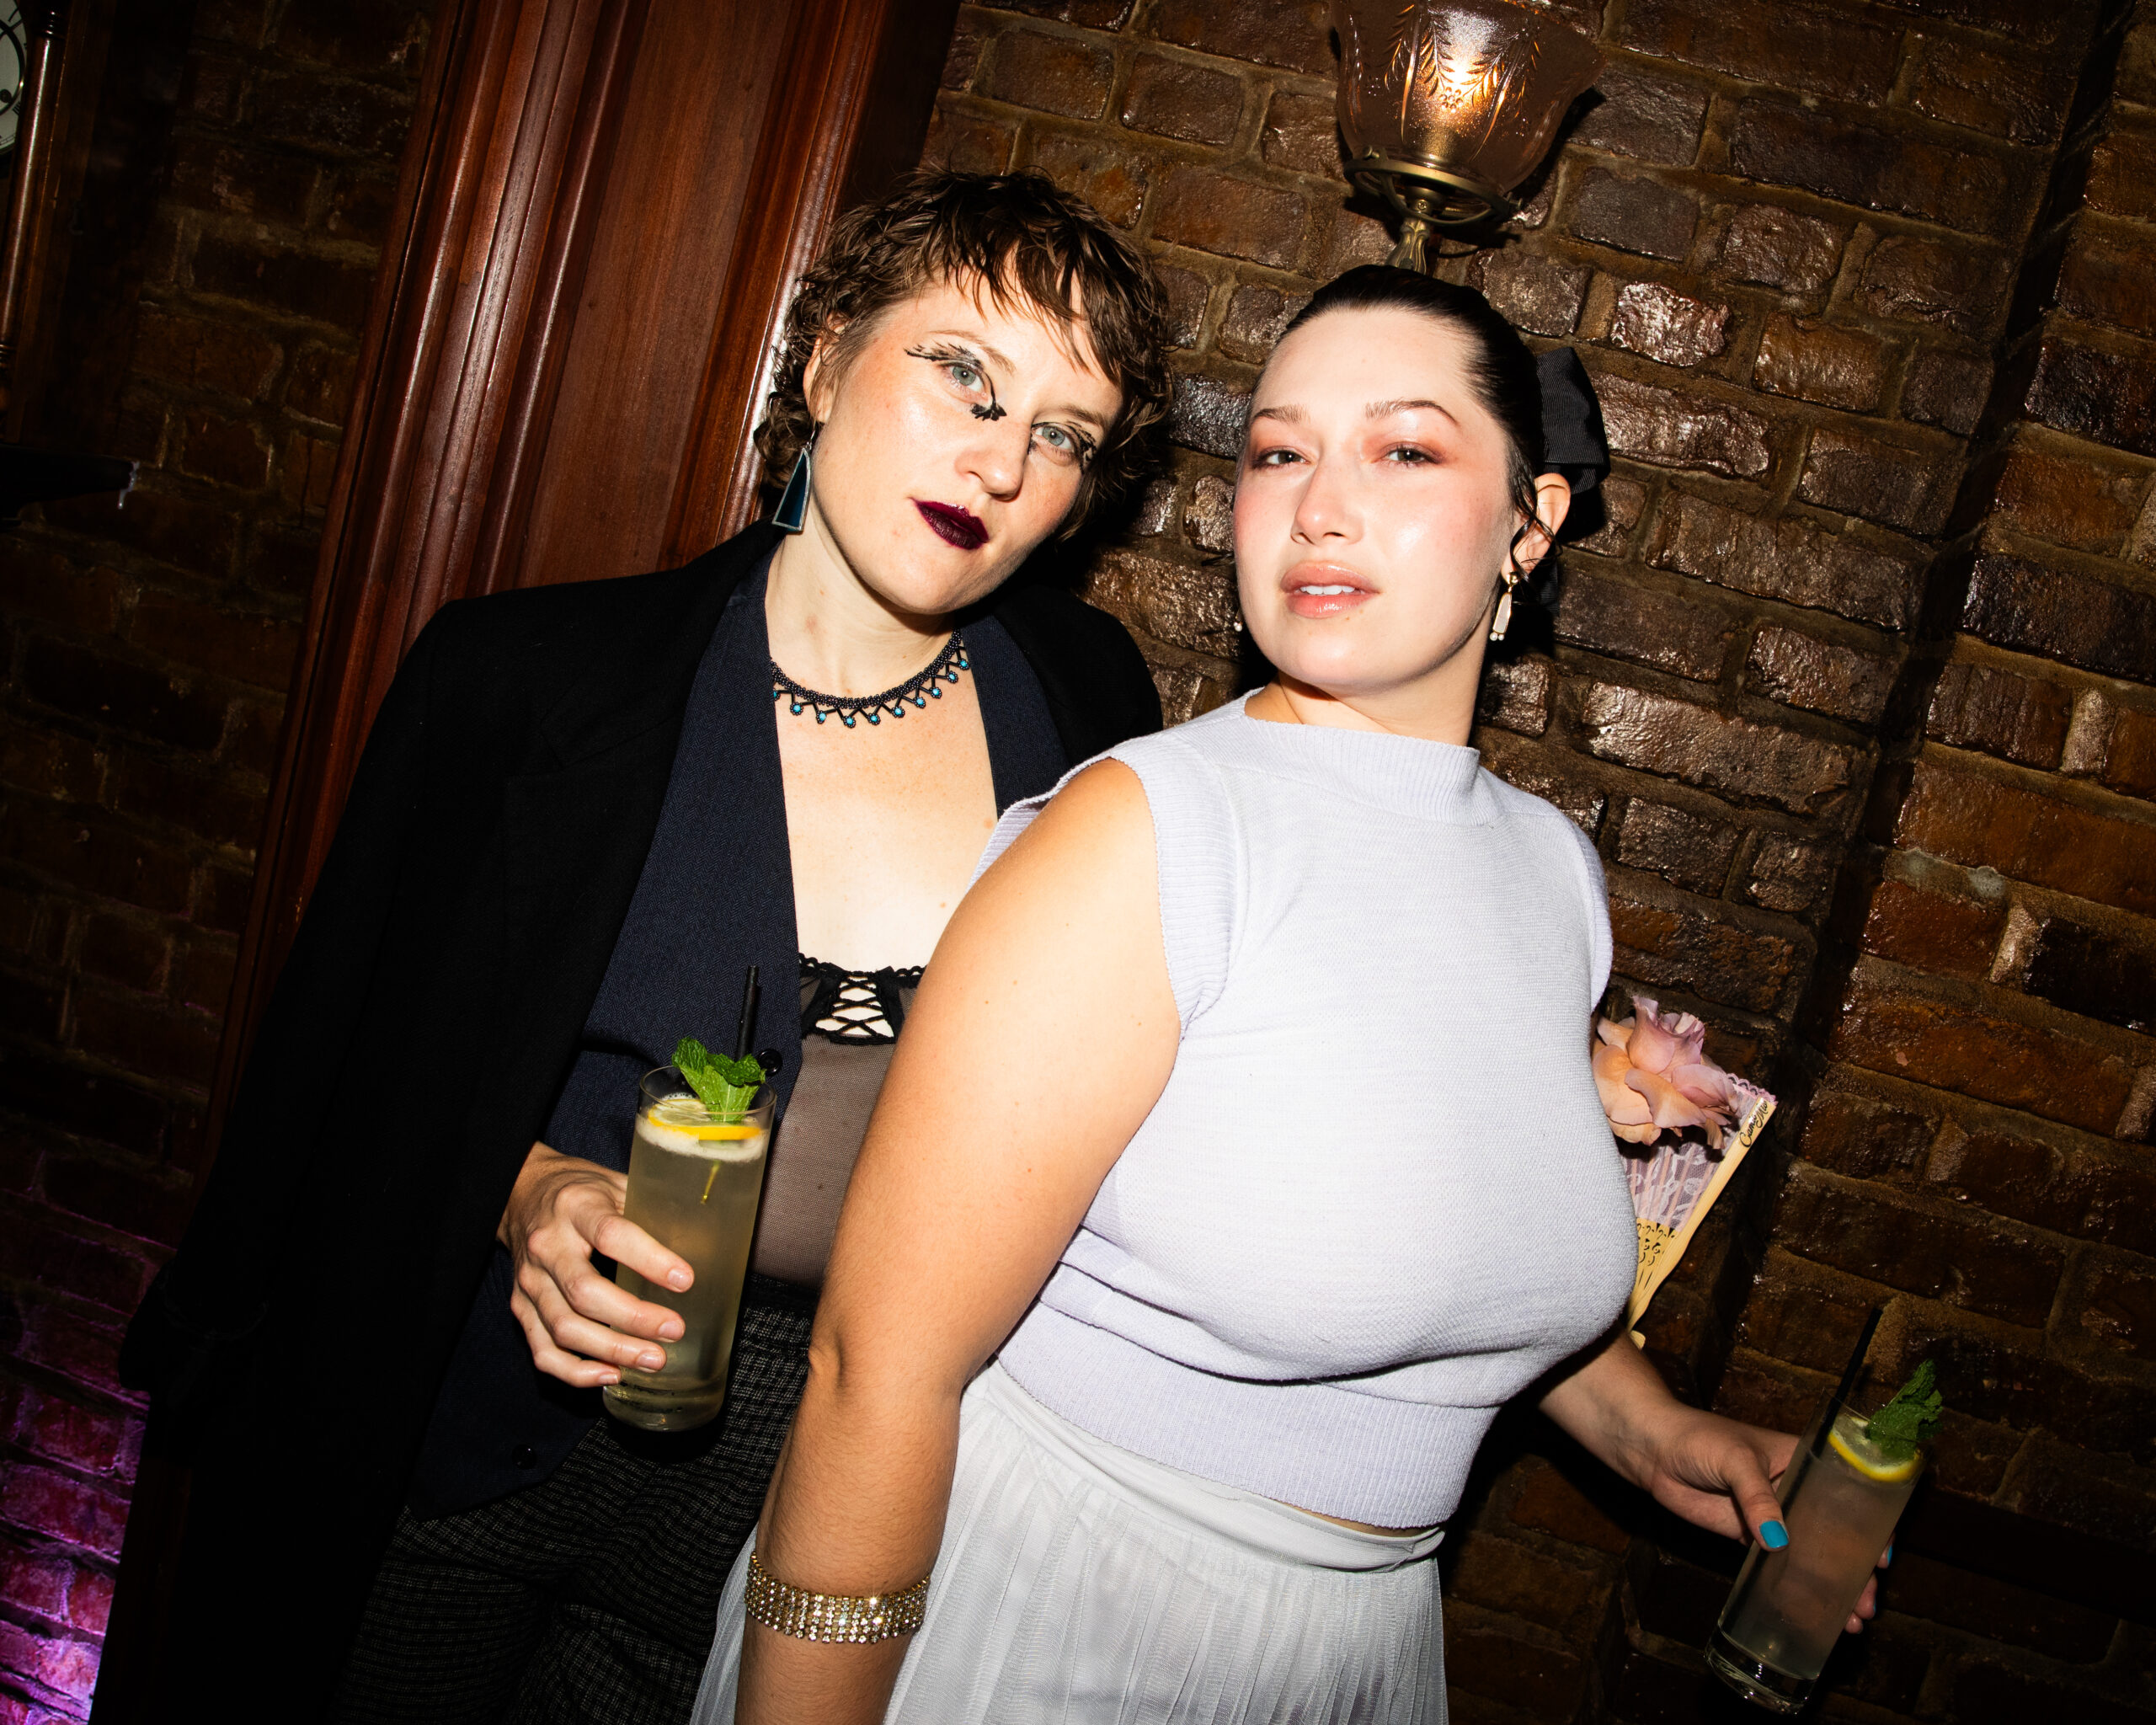 LADYGUNN – BARE NECESSITIES CELEBRATES THE LAUNCH OF CAMIO MIO WITH THE ACES